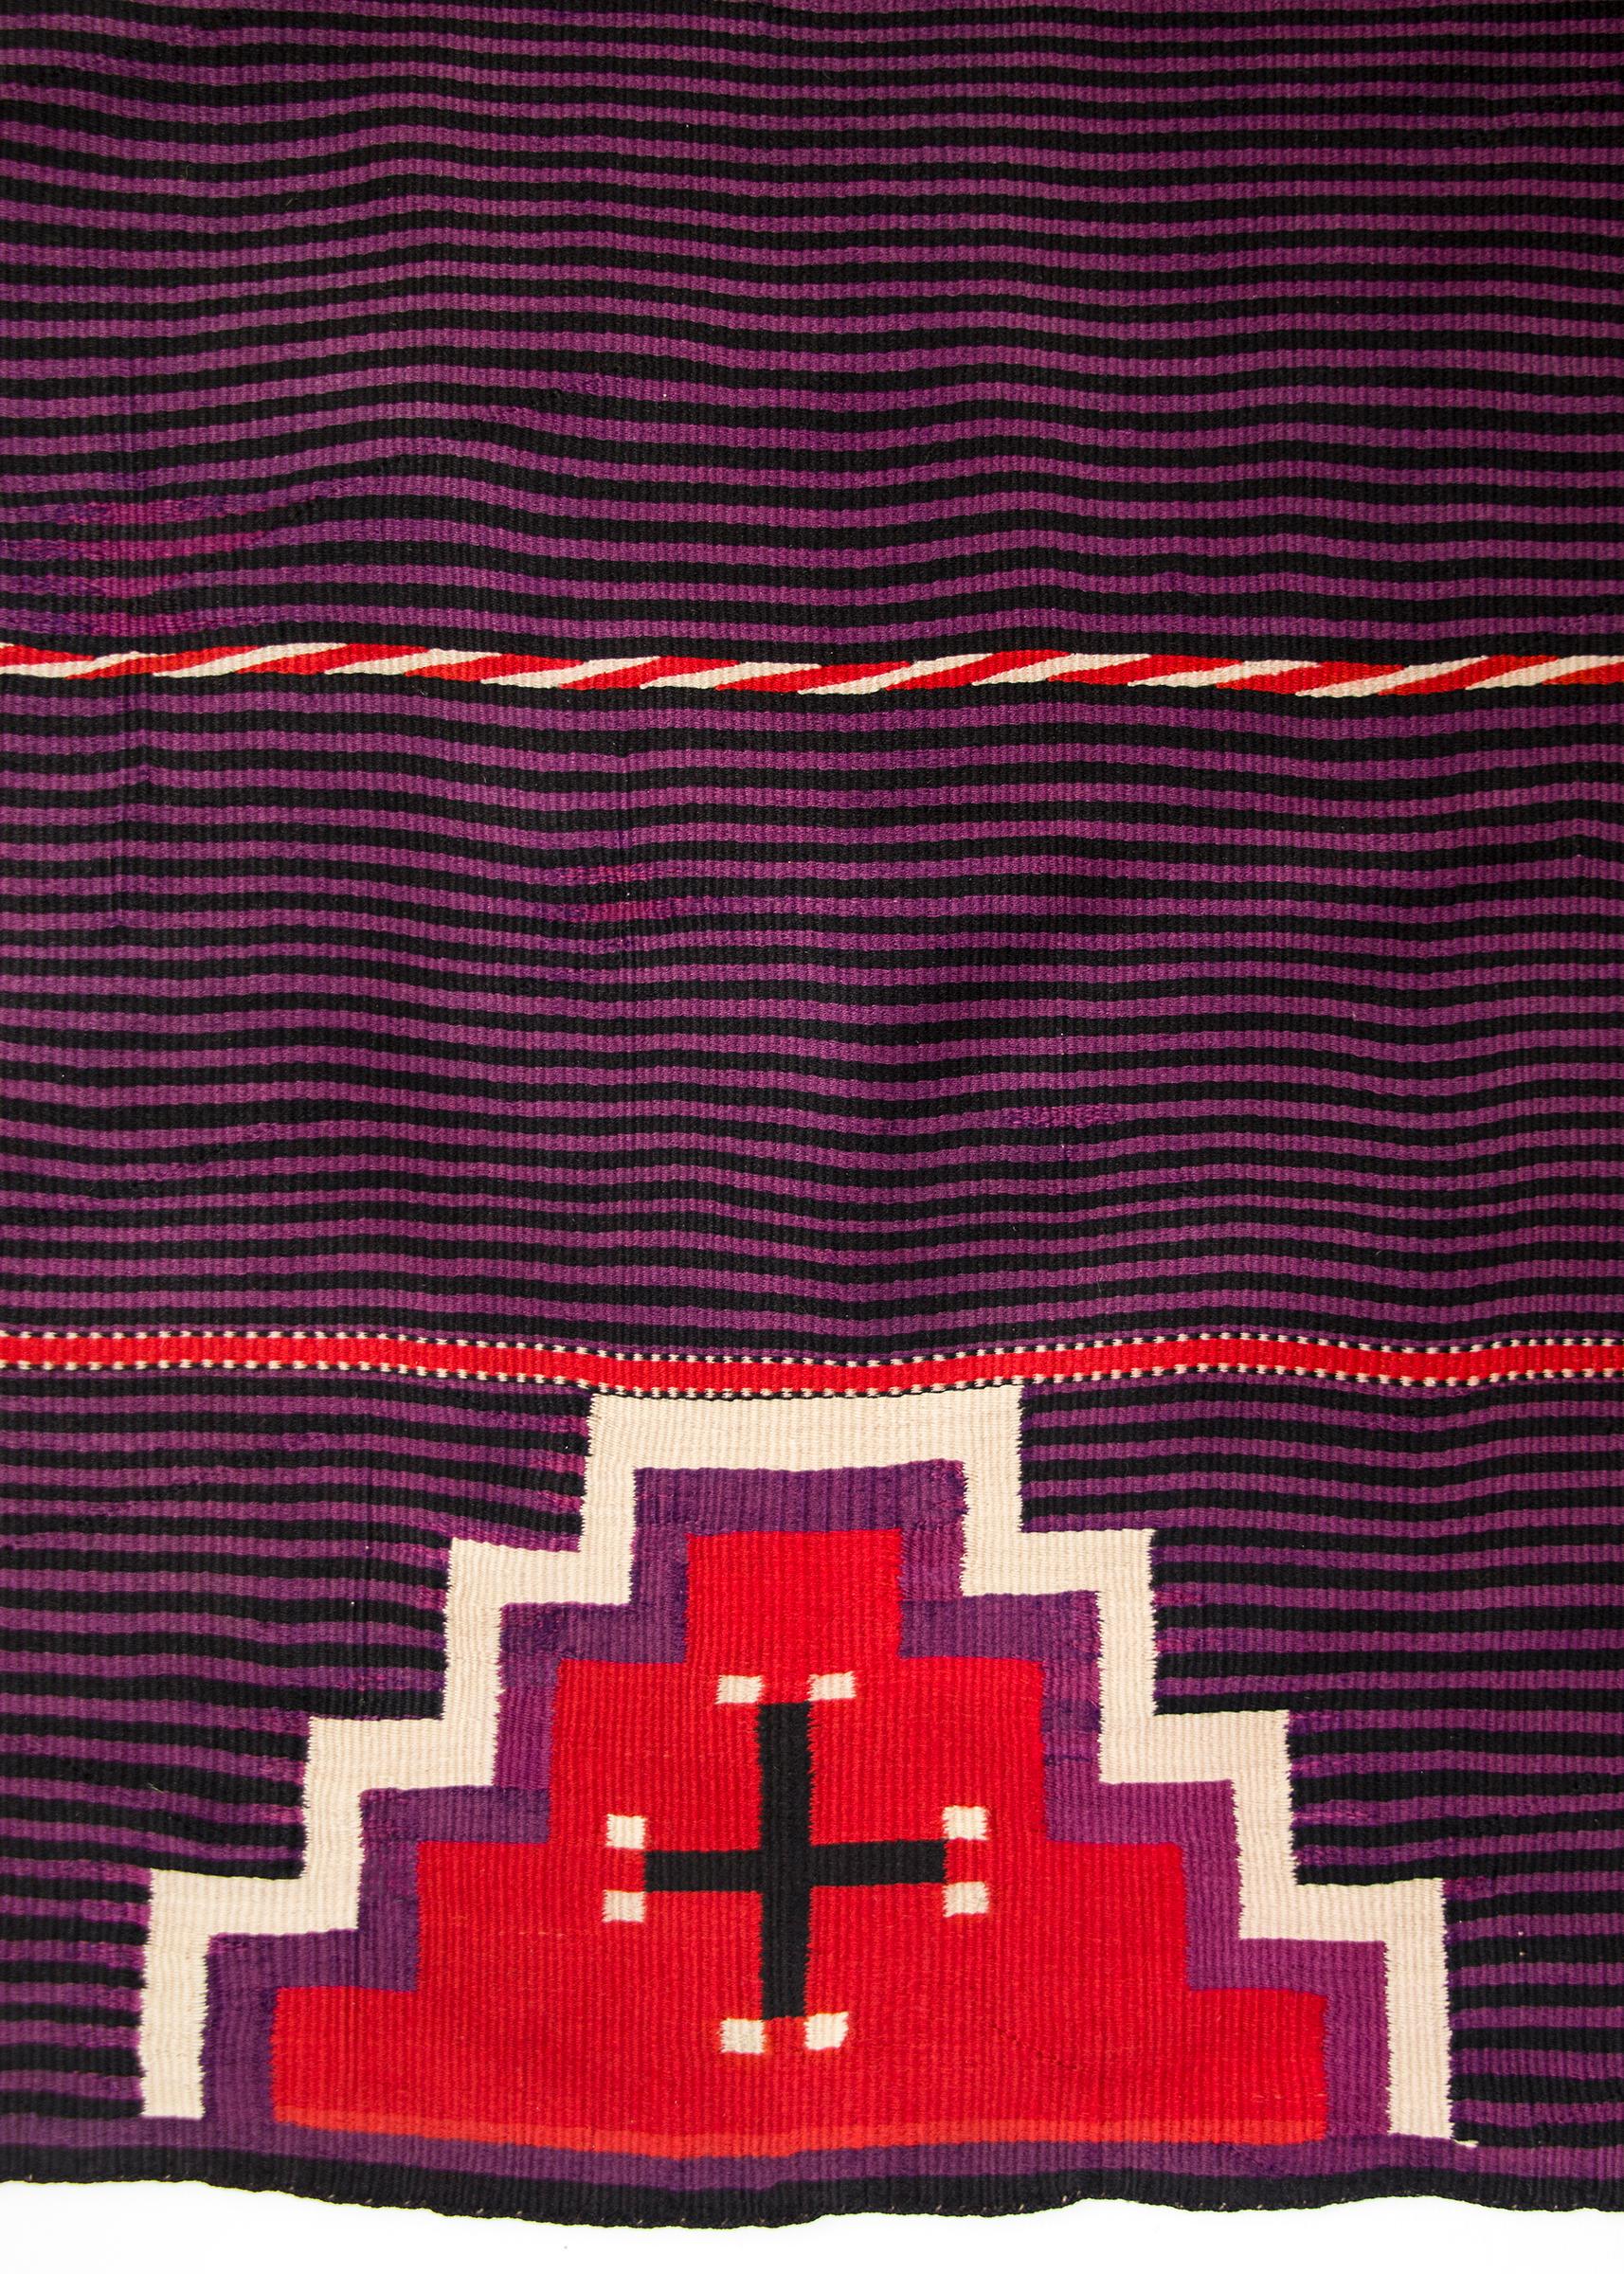 Woven 19th Century Navajo Blanket with a Nine Point Diamond and Cross with Red For Sale